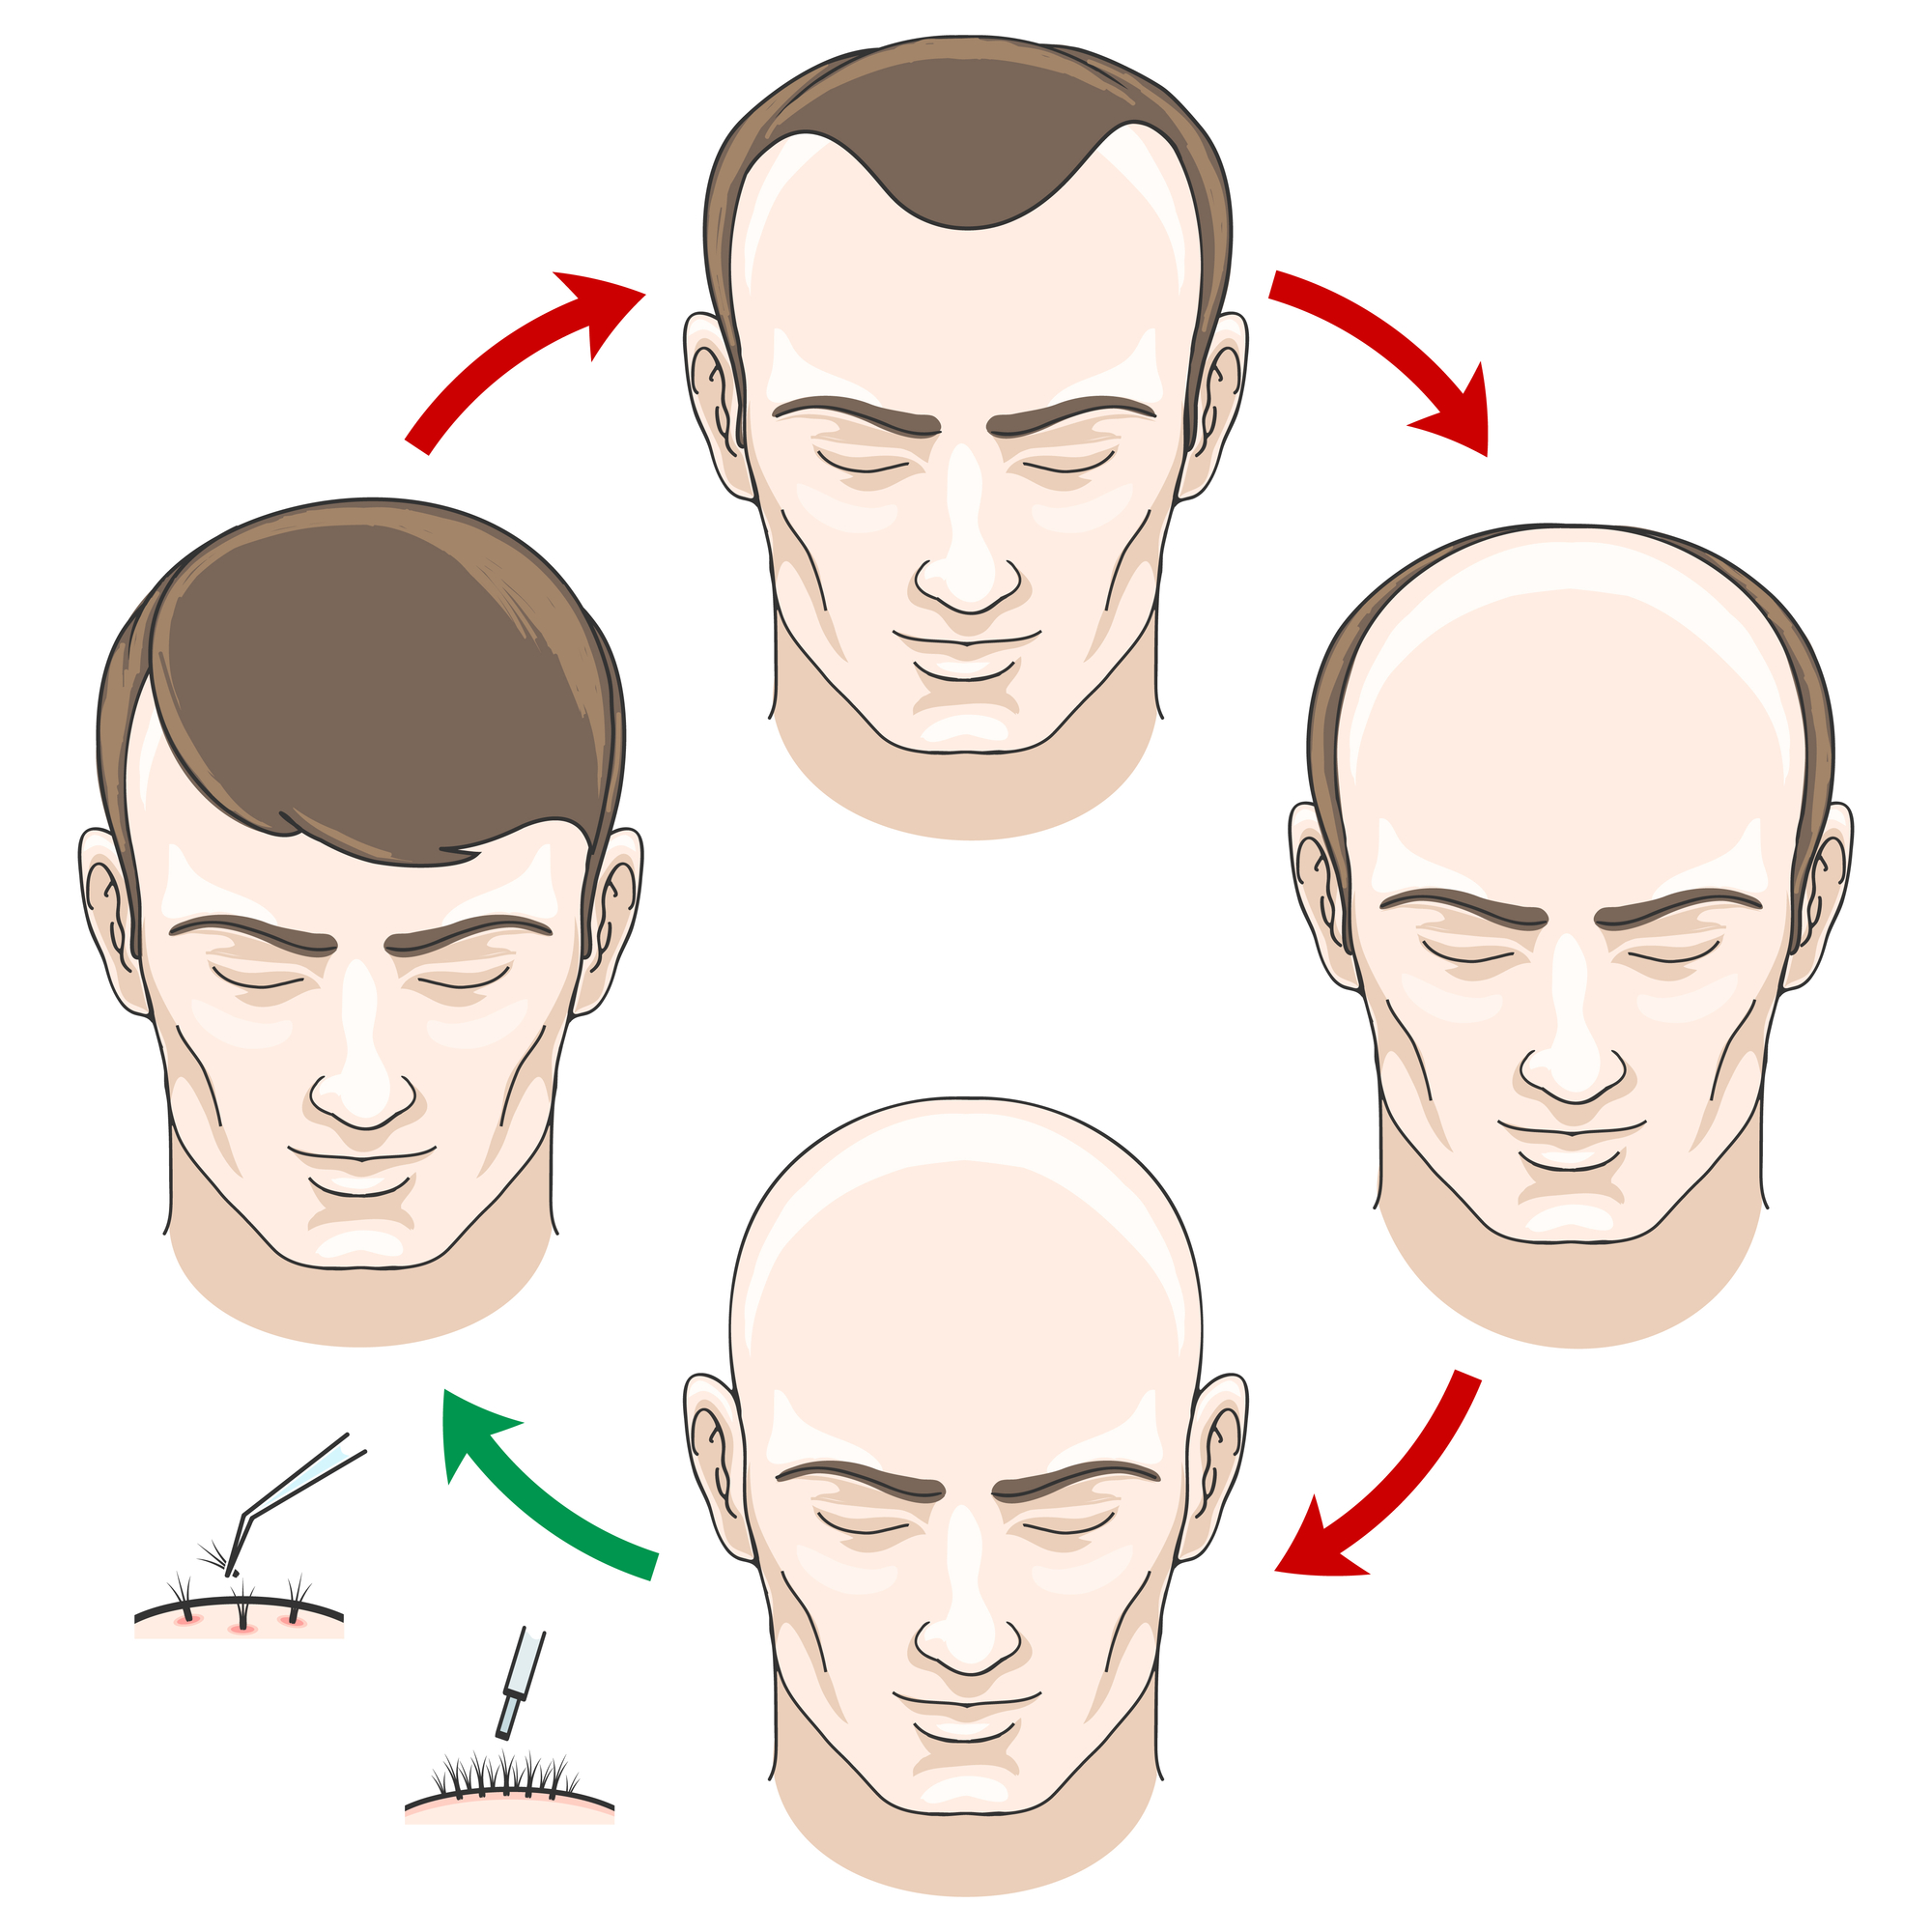 Stages of hair loss, treatment and transplantation